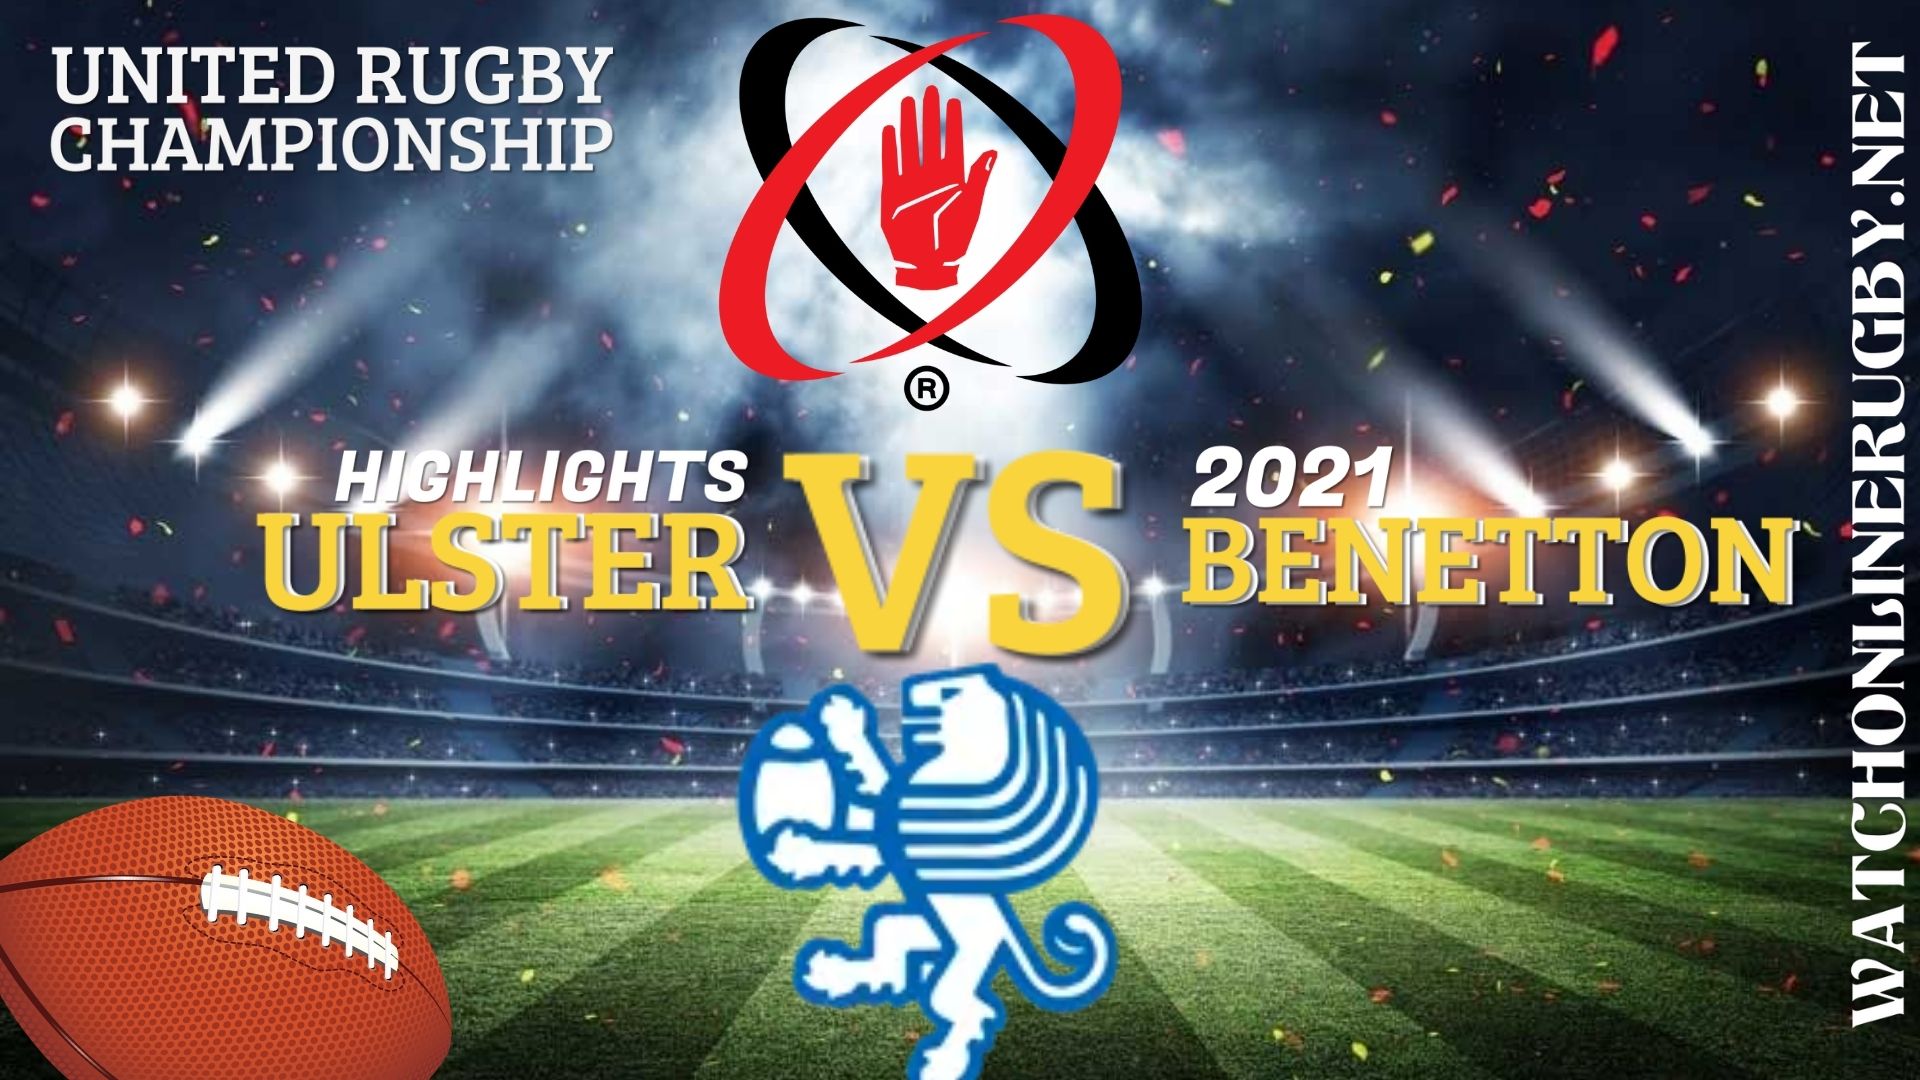 Ulster Vs Benetton United Rugby Championship 2021 RD 3